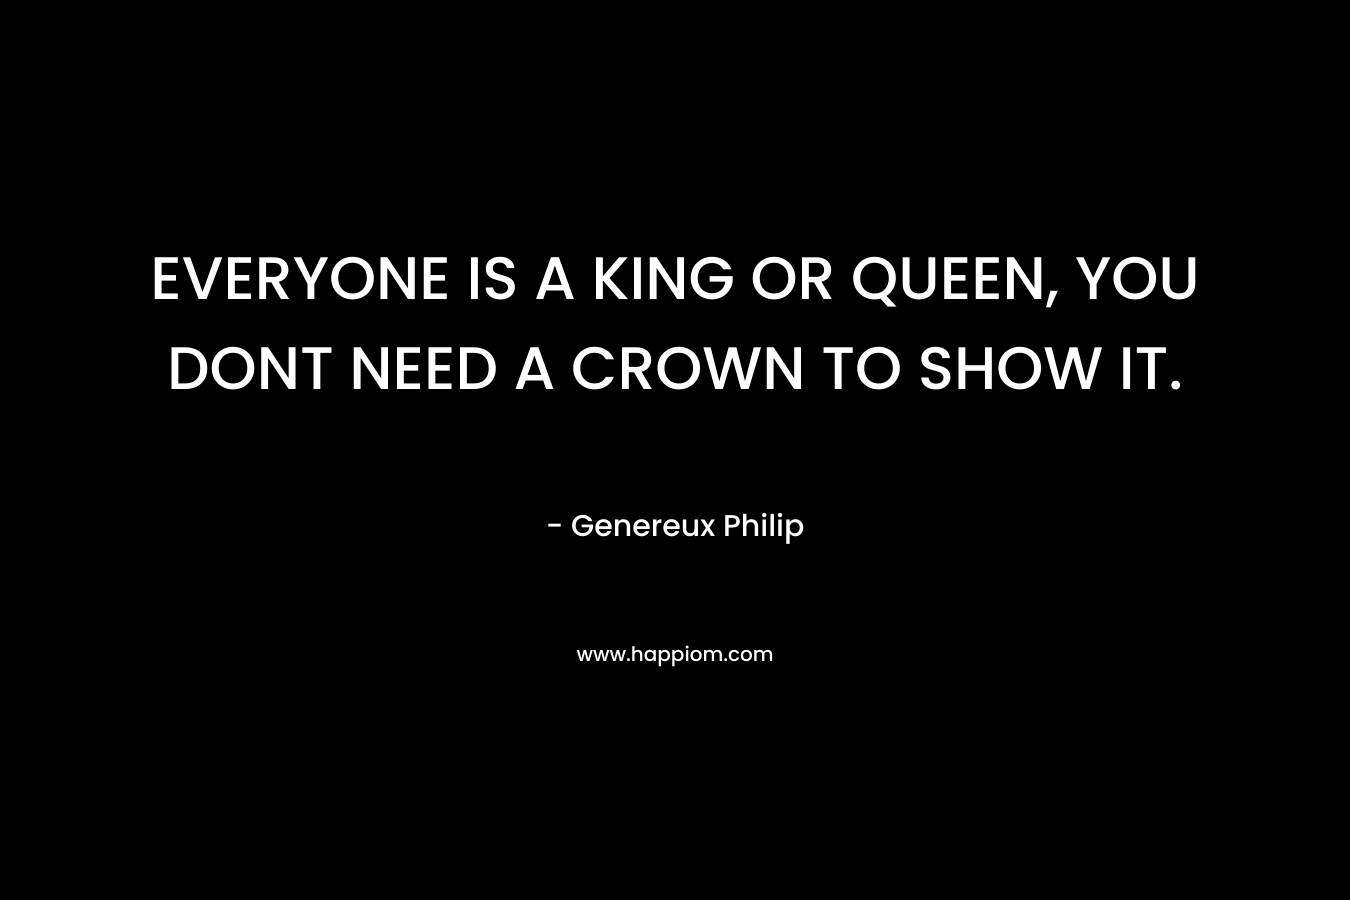 EVERYONE IS A KING OR QUEEN, YOU DONT NEED A CROWN TO SHOW IT.